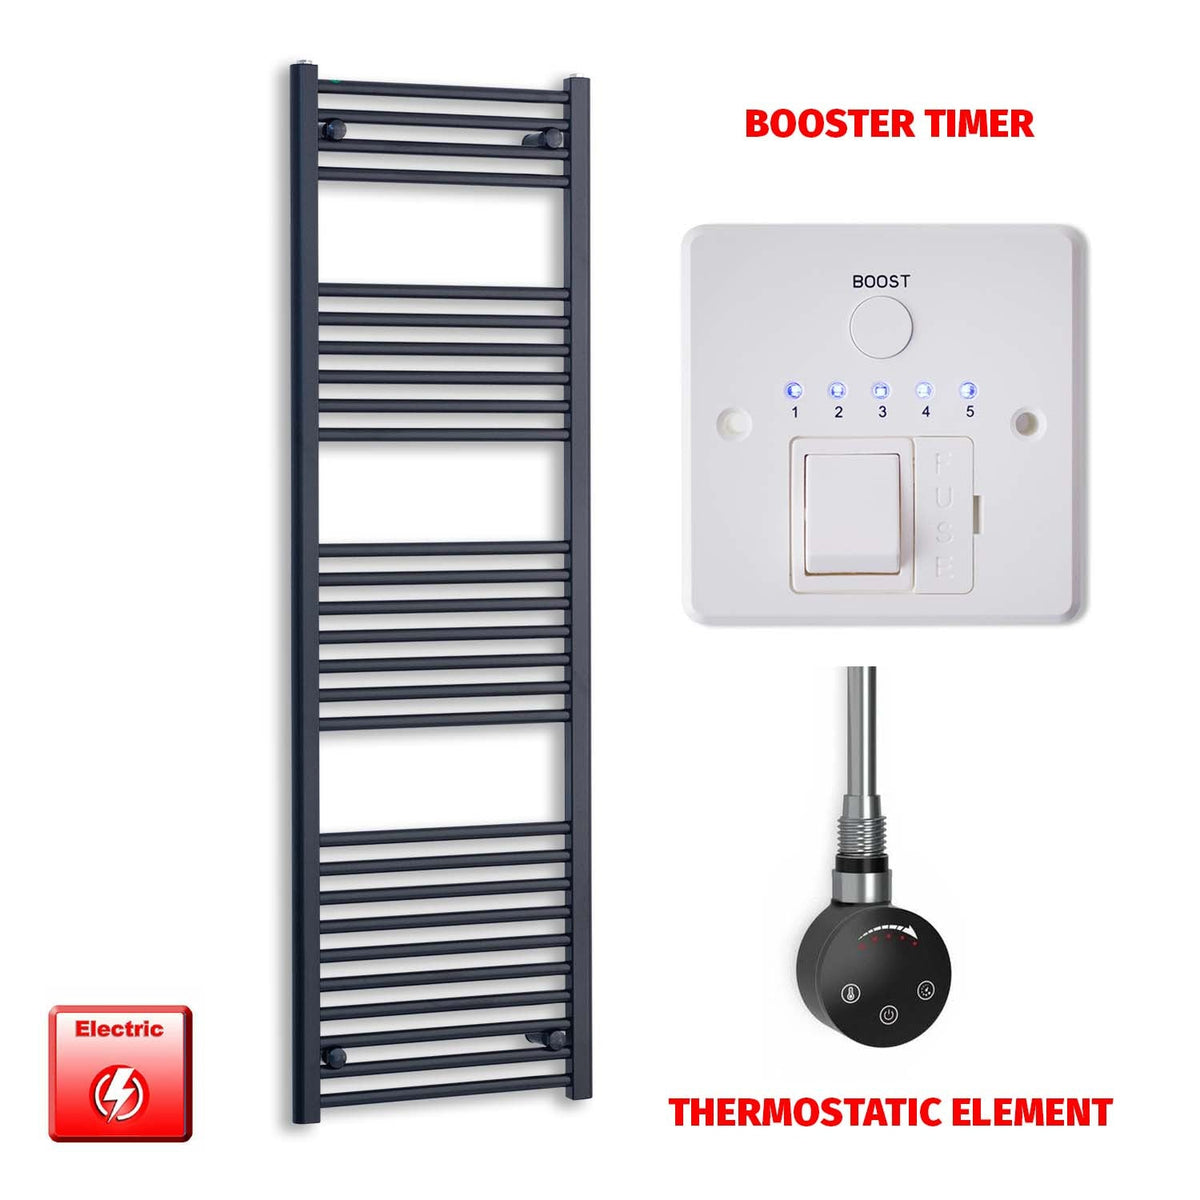 1600 x 550 Wide Flat Black Pre-Filled Electric Heated Towel Radiator HTR SMART Thermostatic Booster Timer